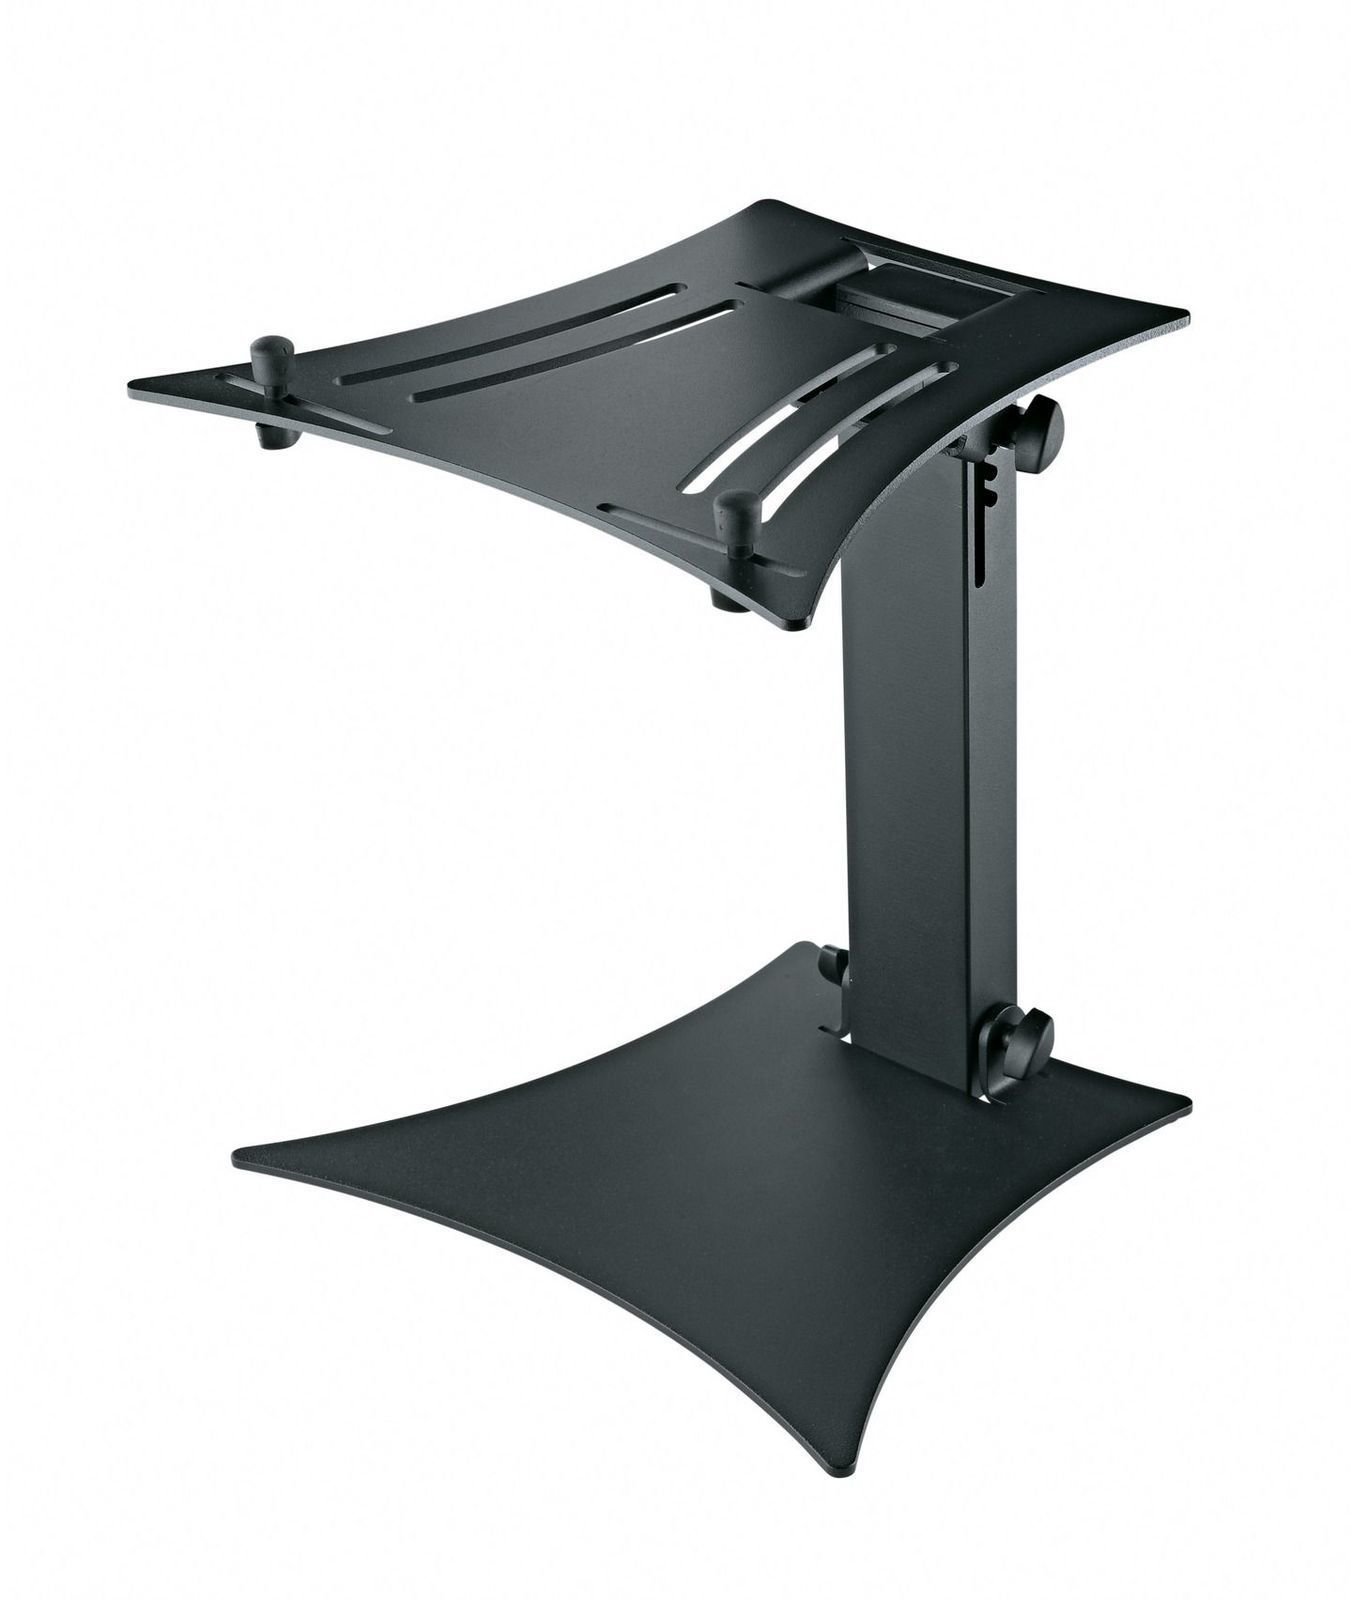 Stand for PC Konig & Meyer 12190 Laptop Stand